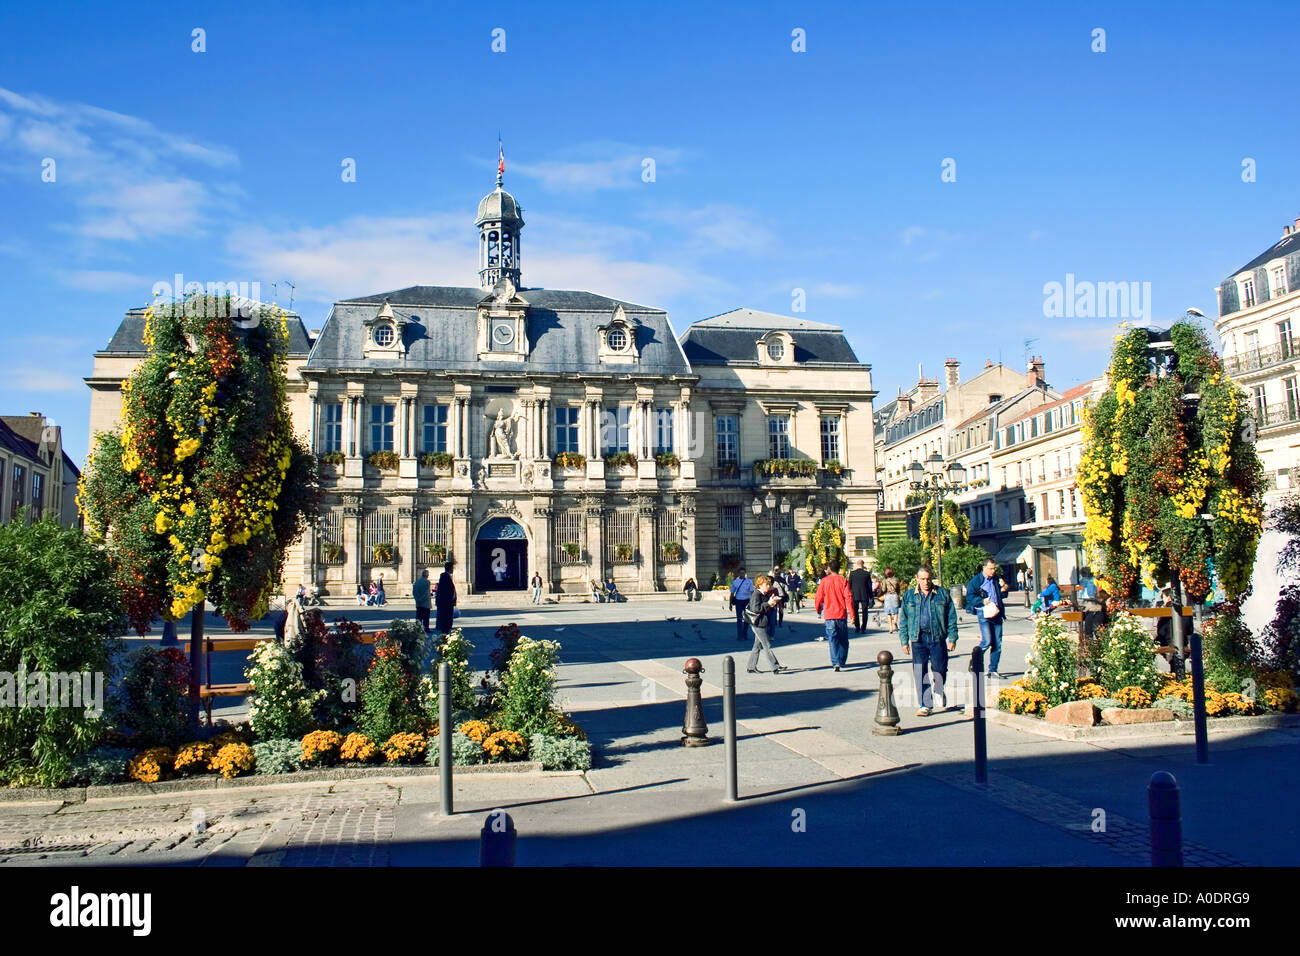 Square of the Town of Troyes France Champagne Ardennes region Stock Photo